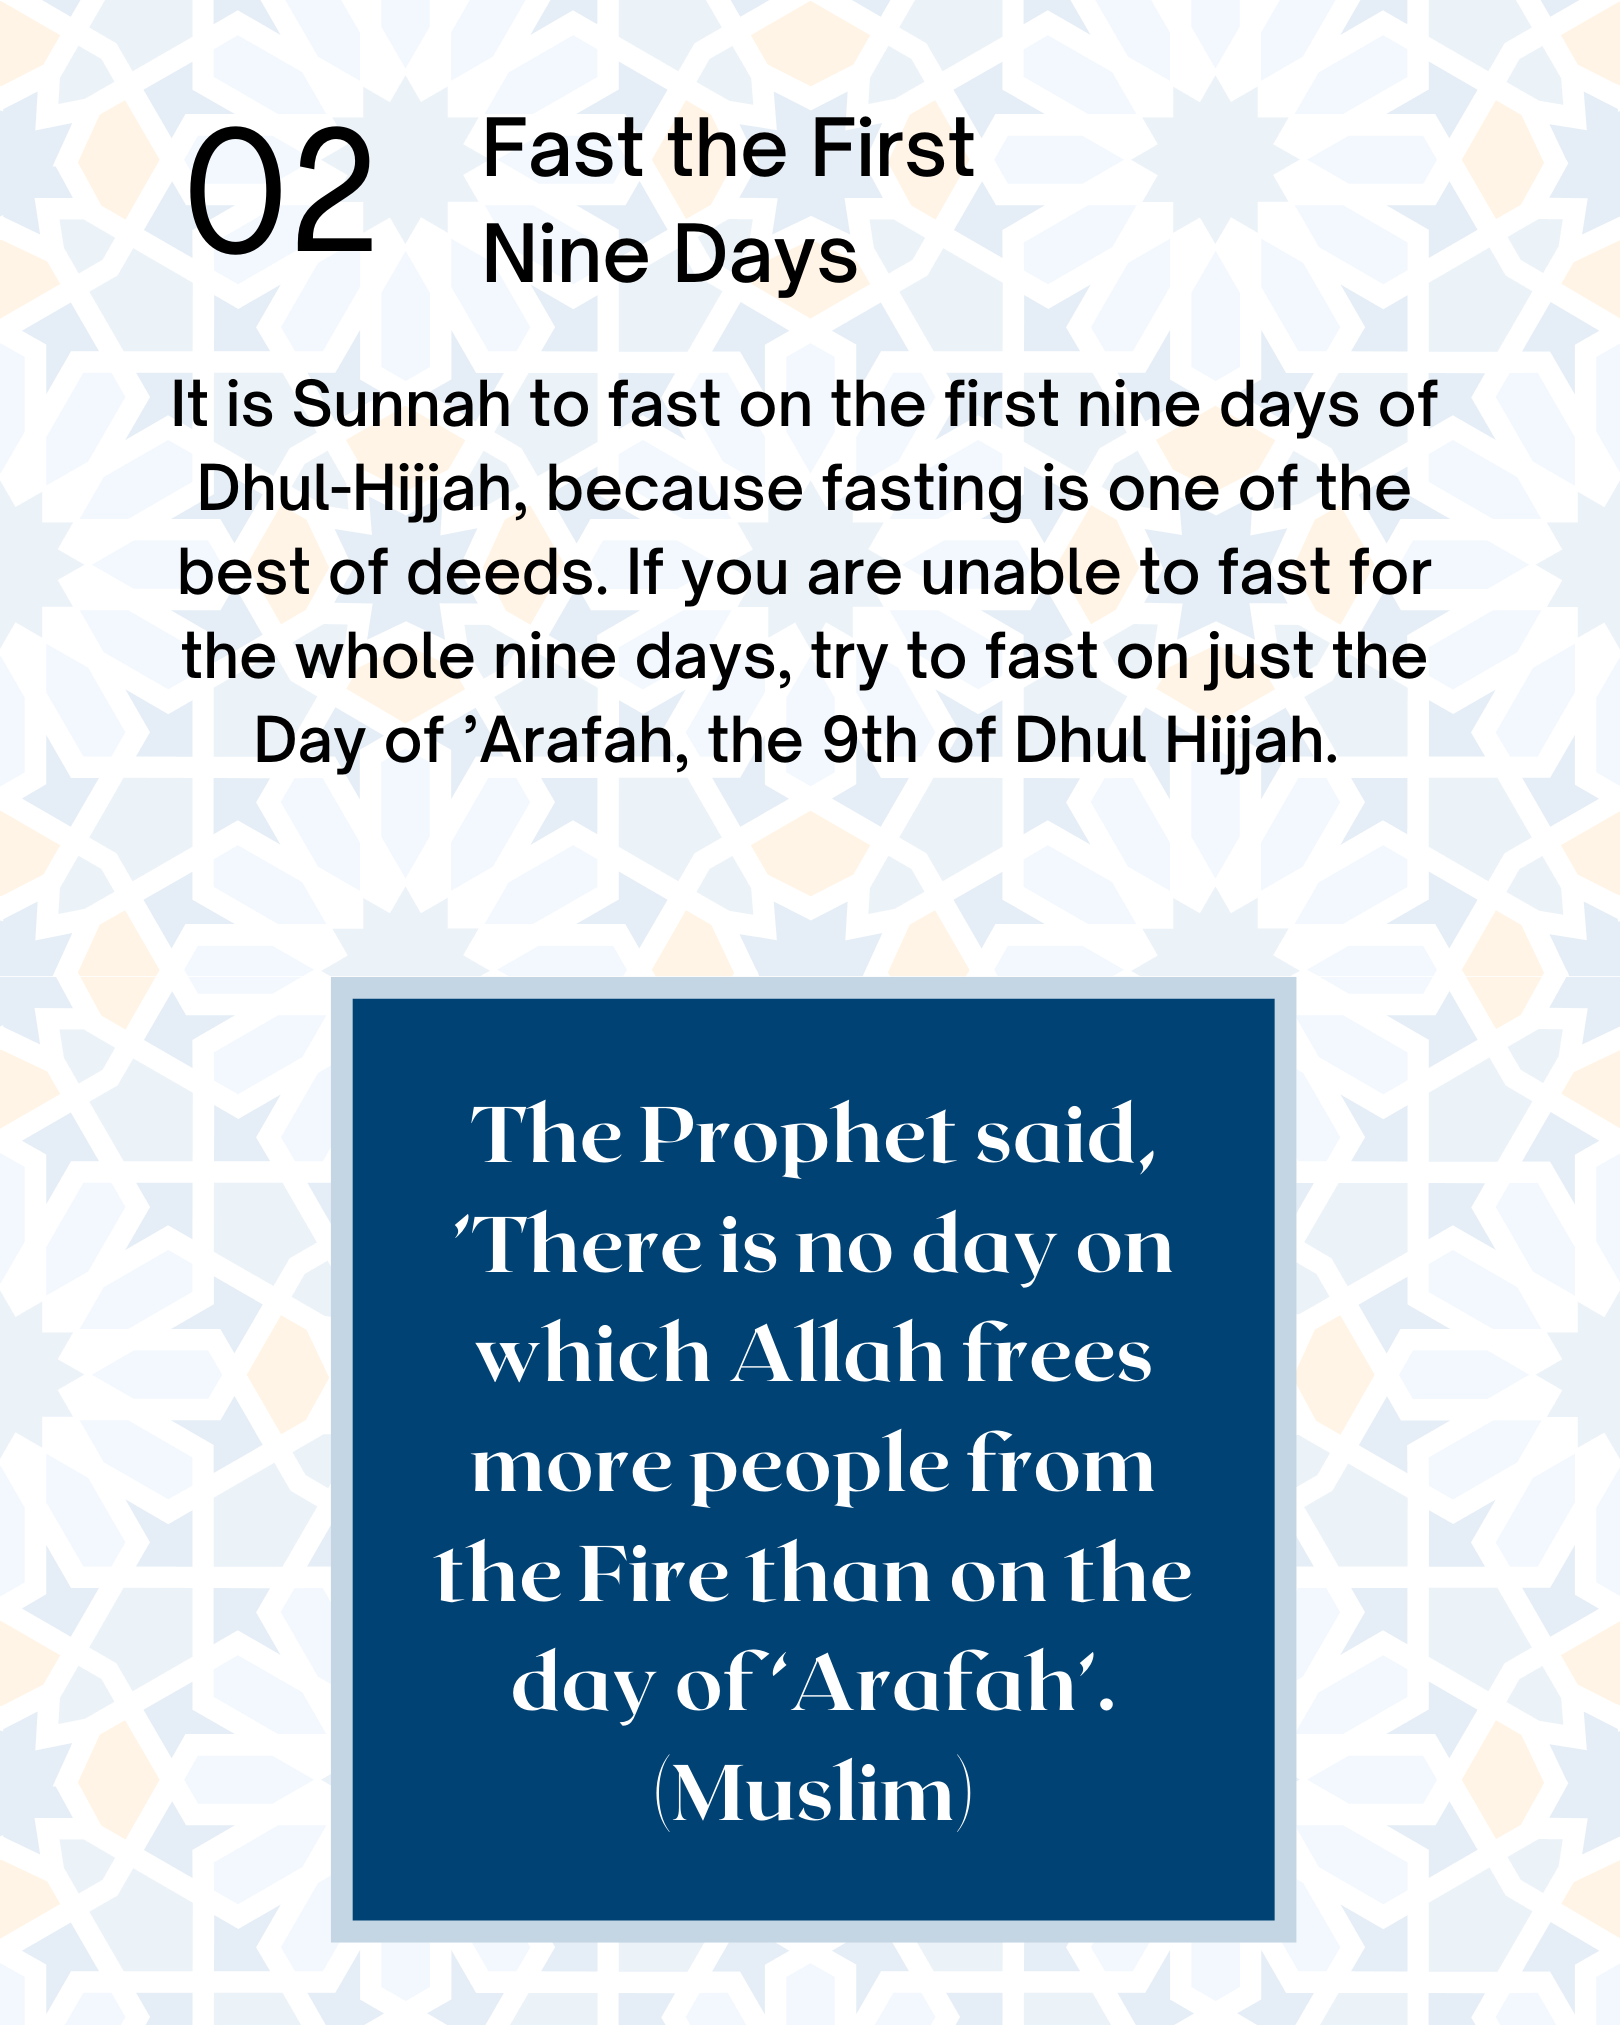 10 Deeds to Embrace During the Sacred Days of DhulHijjah